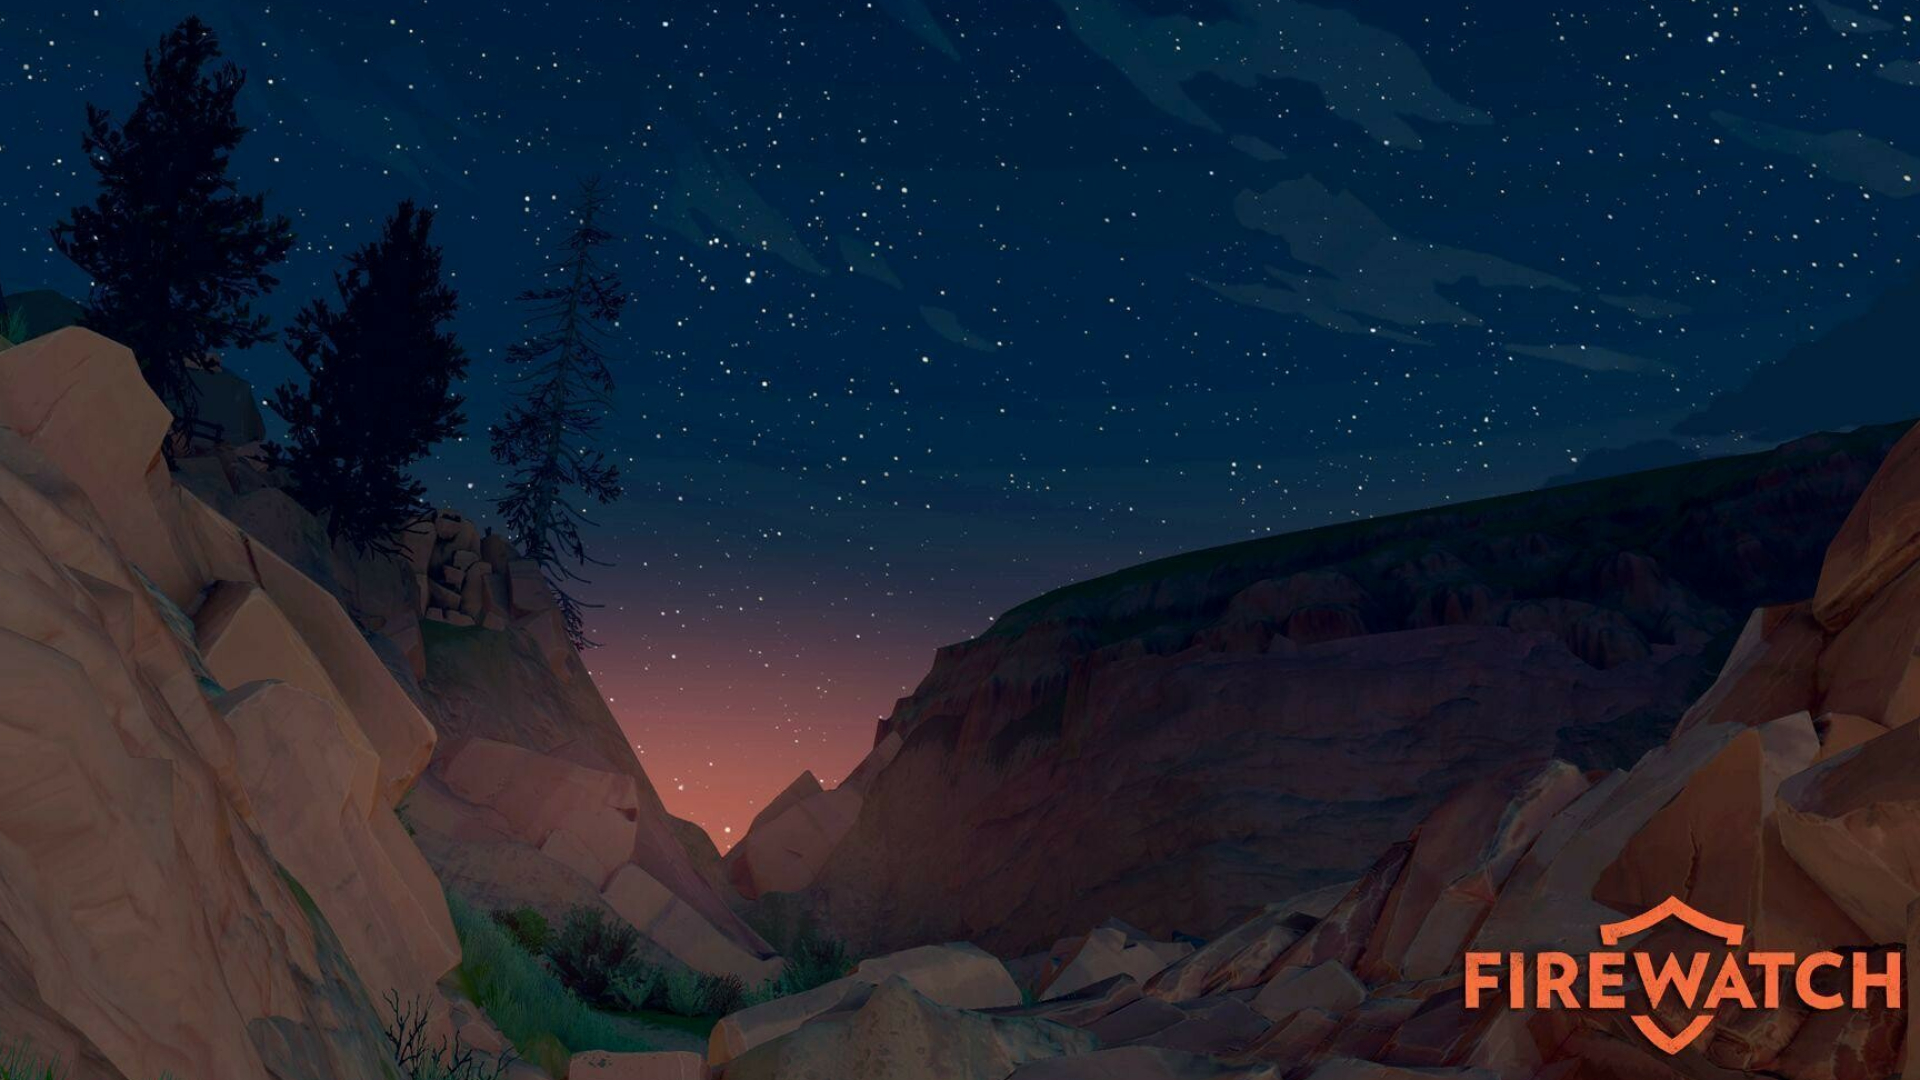 Firewatch: The game uses a well-worn story mechanic wielded by genre masters like Poe and Lovecraft, gradually working on the player’s mind like a narrative mental thumbscrew. 1920x1080 Full HD Wallpaper.